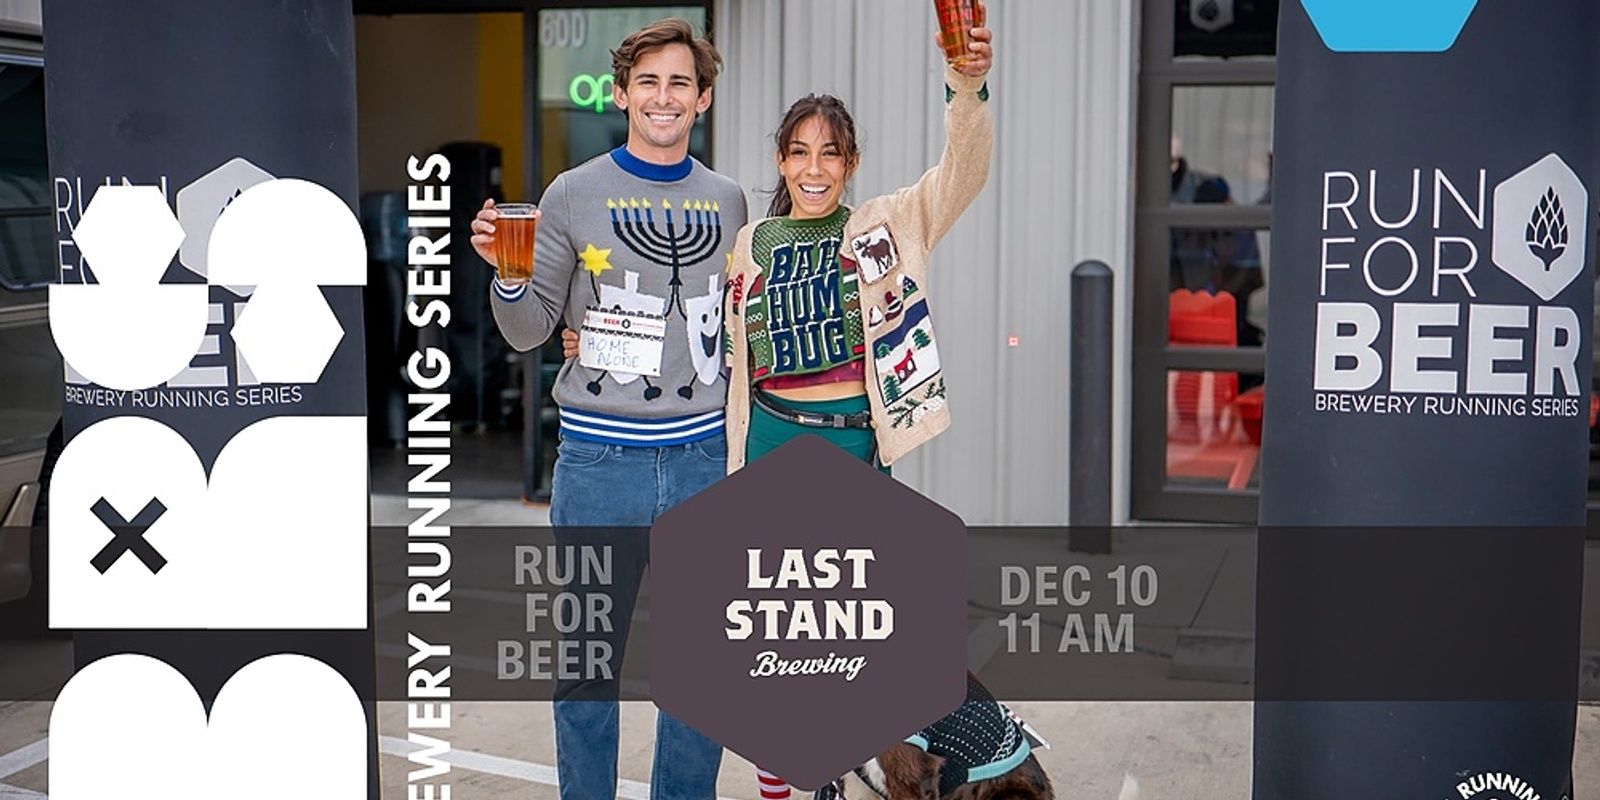 Banner image for Beer Run - Last Stand Holiday 5k |2022 TX Brewery Running Series